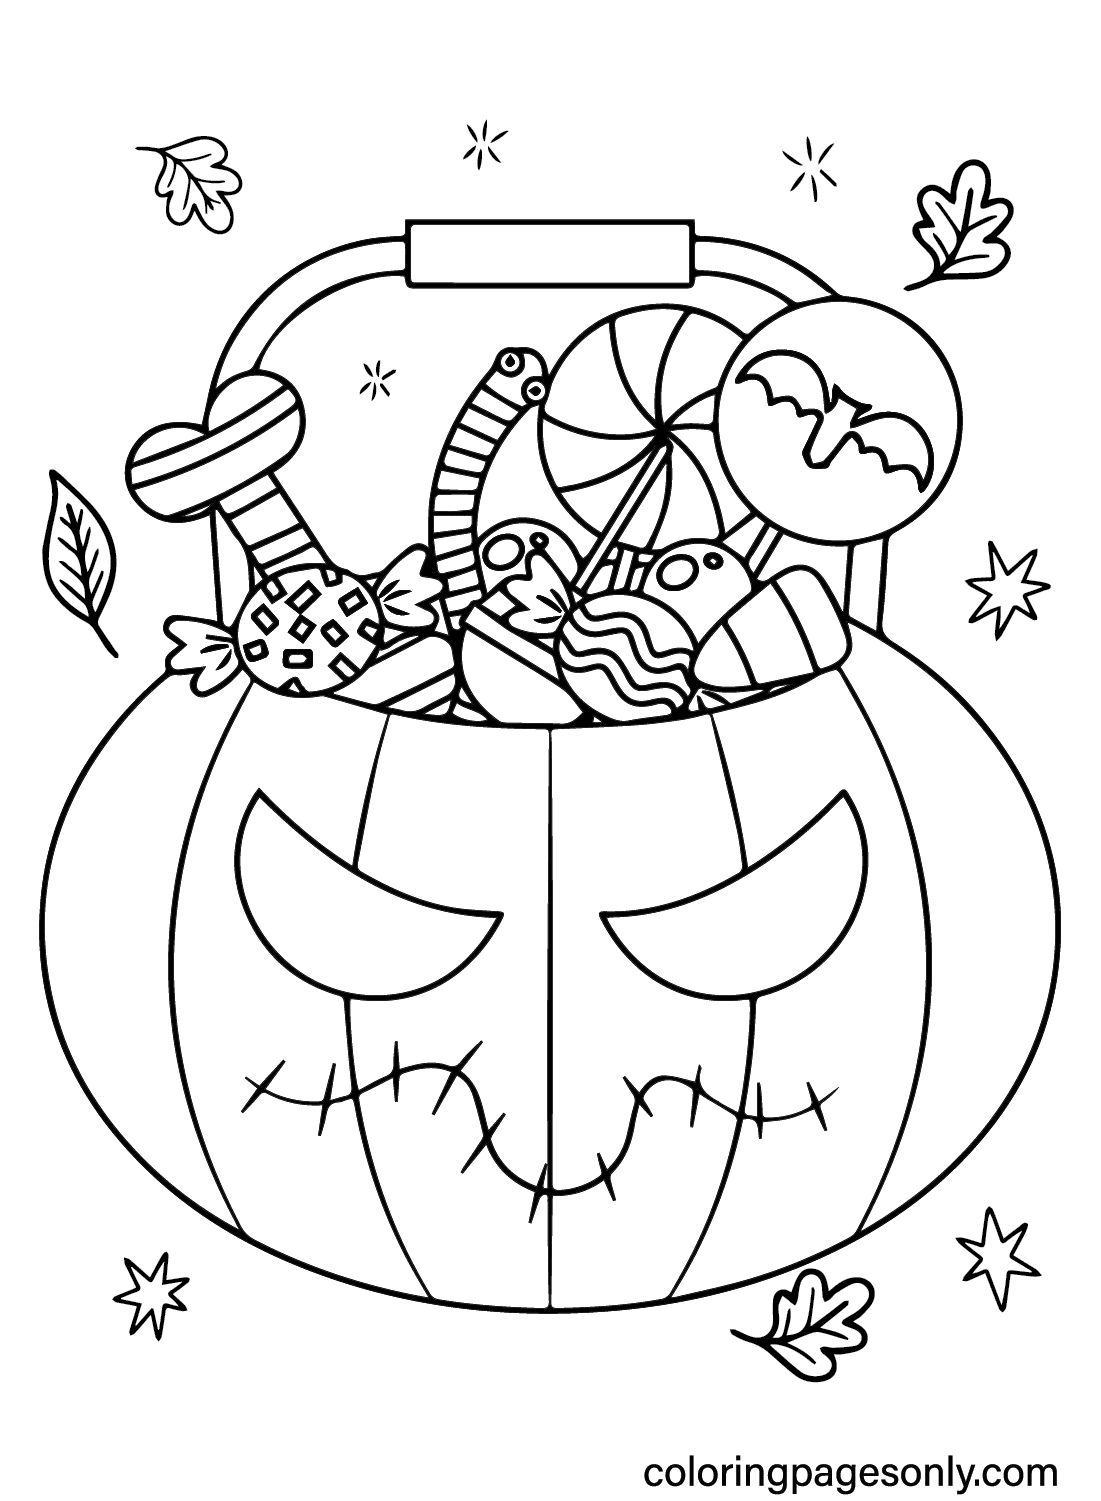 Halloween Candy Coloring Page to Print - Free Printable Coloring Pages